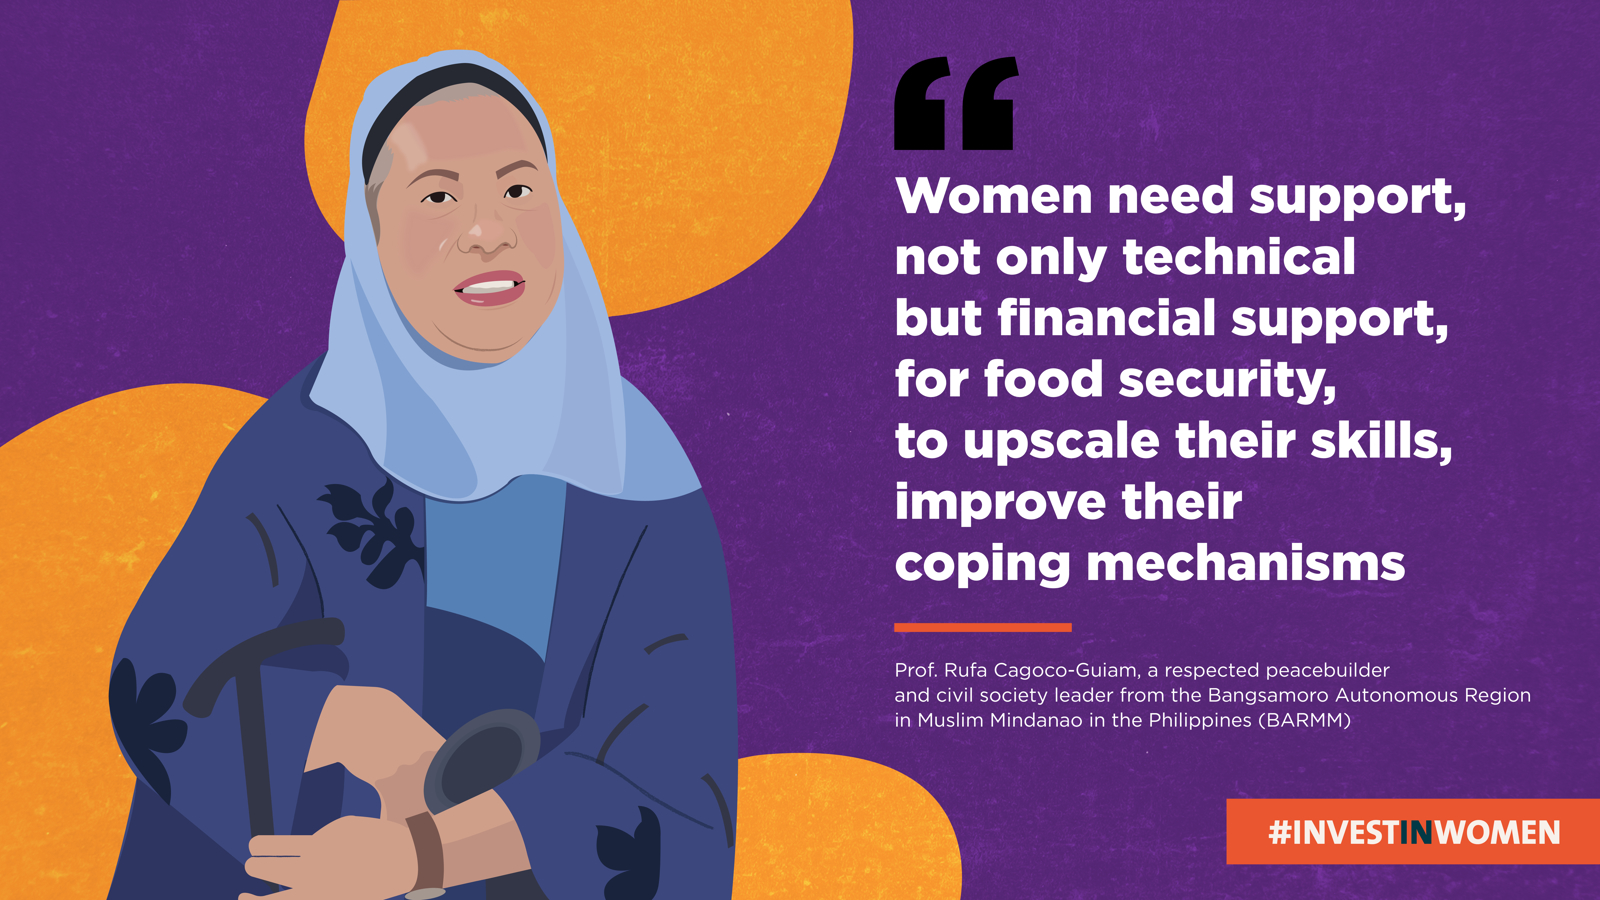 Time is now to invest in women, peace and climate security in Asia and the Pacific